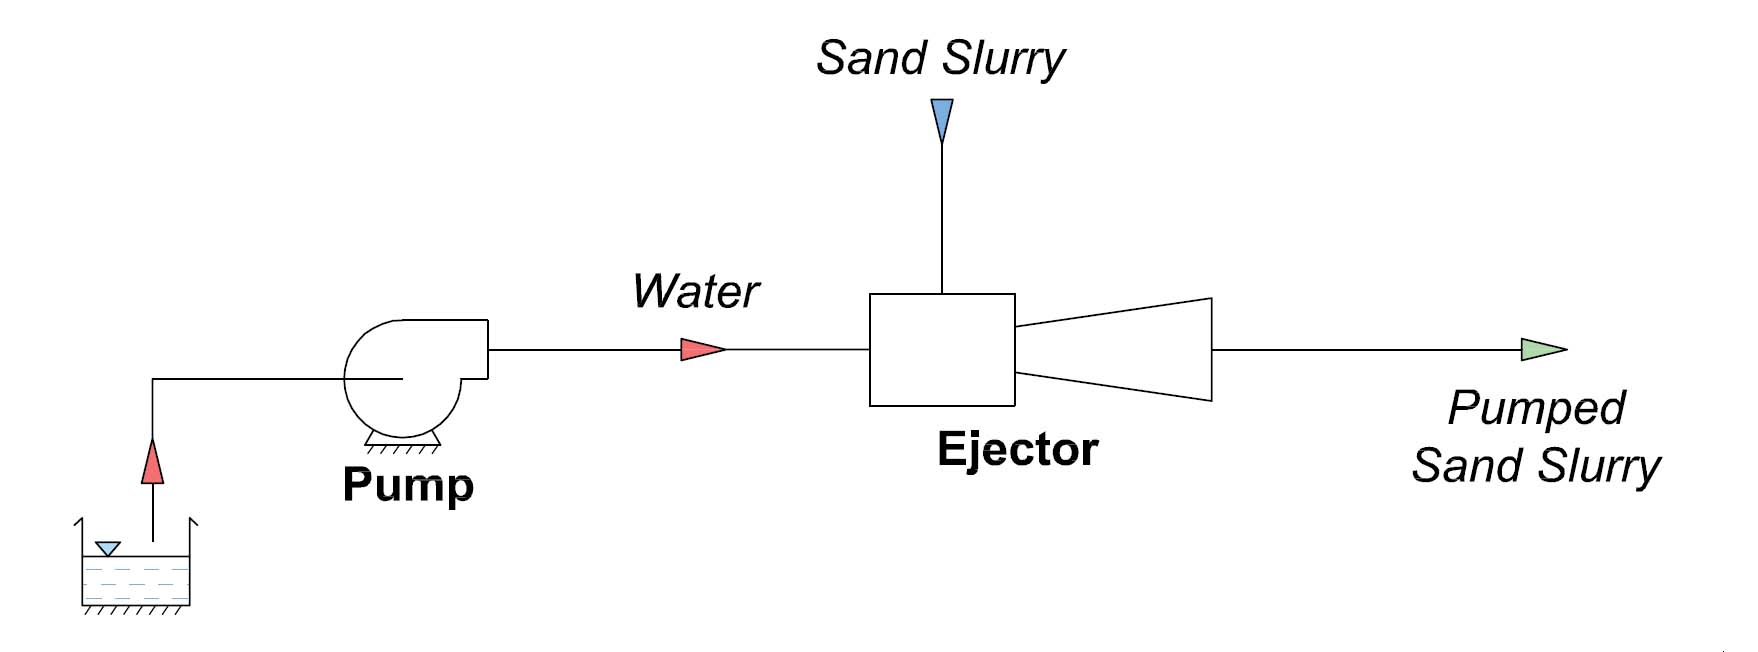 Slurry Eductors for transporting Sand Slurry through pipelines